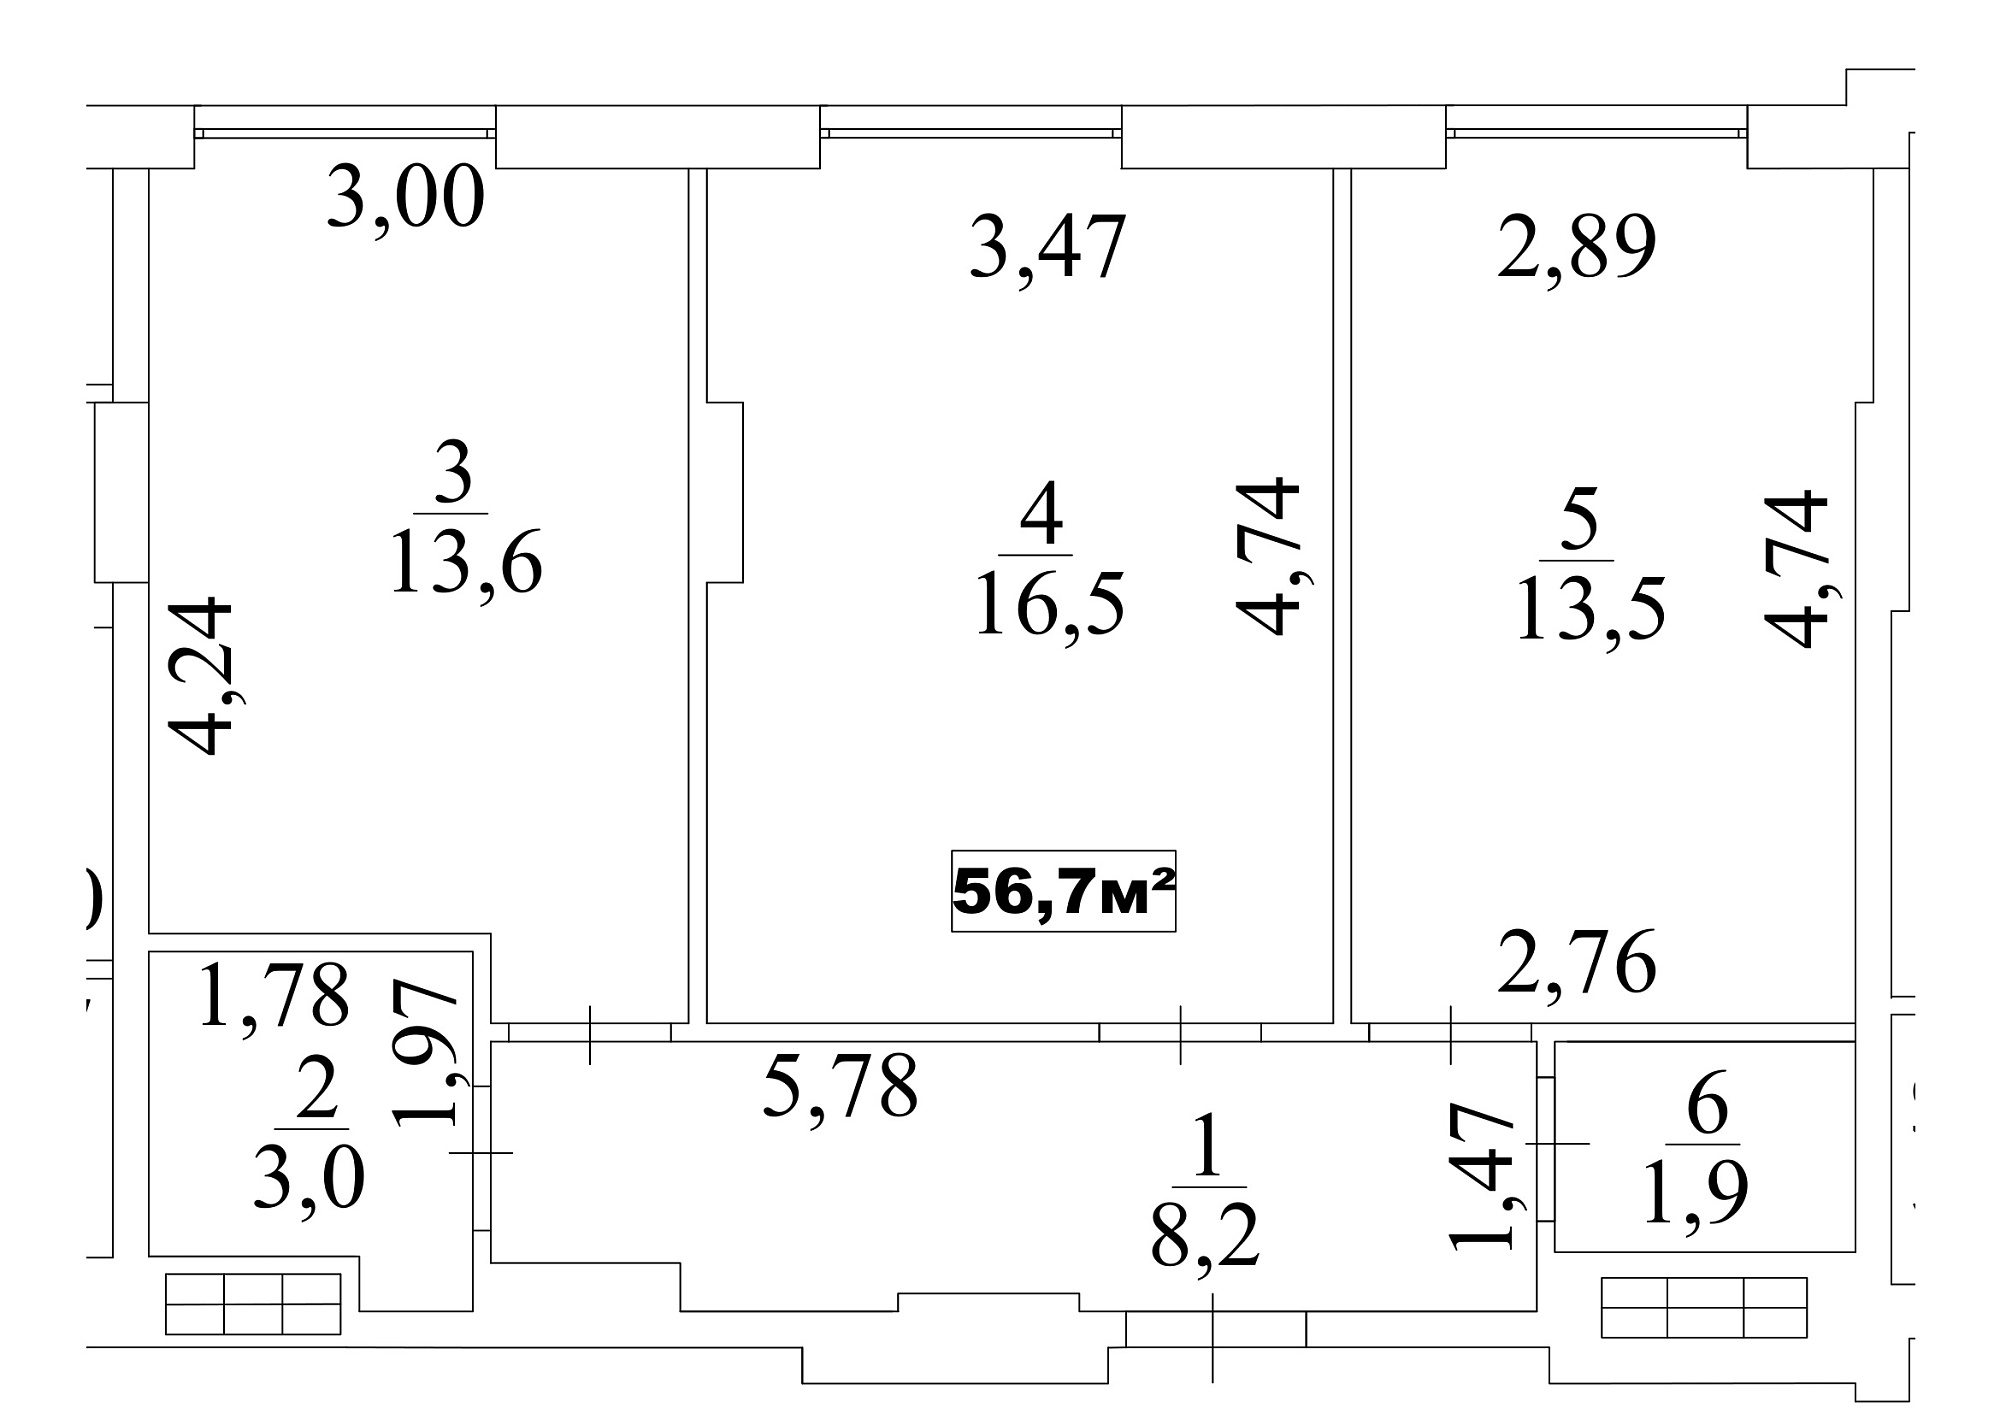 Planning 2-rm flats area 56.7m2, AB-10-07/00058.